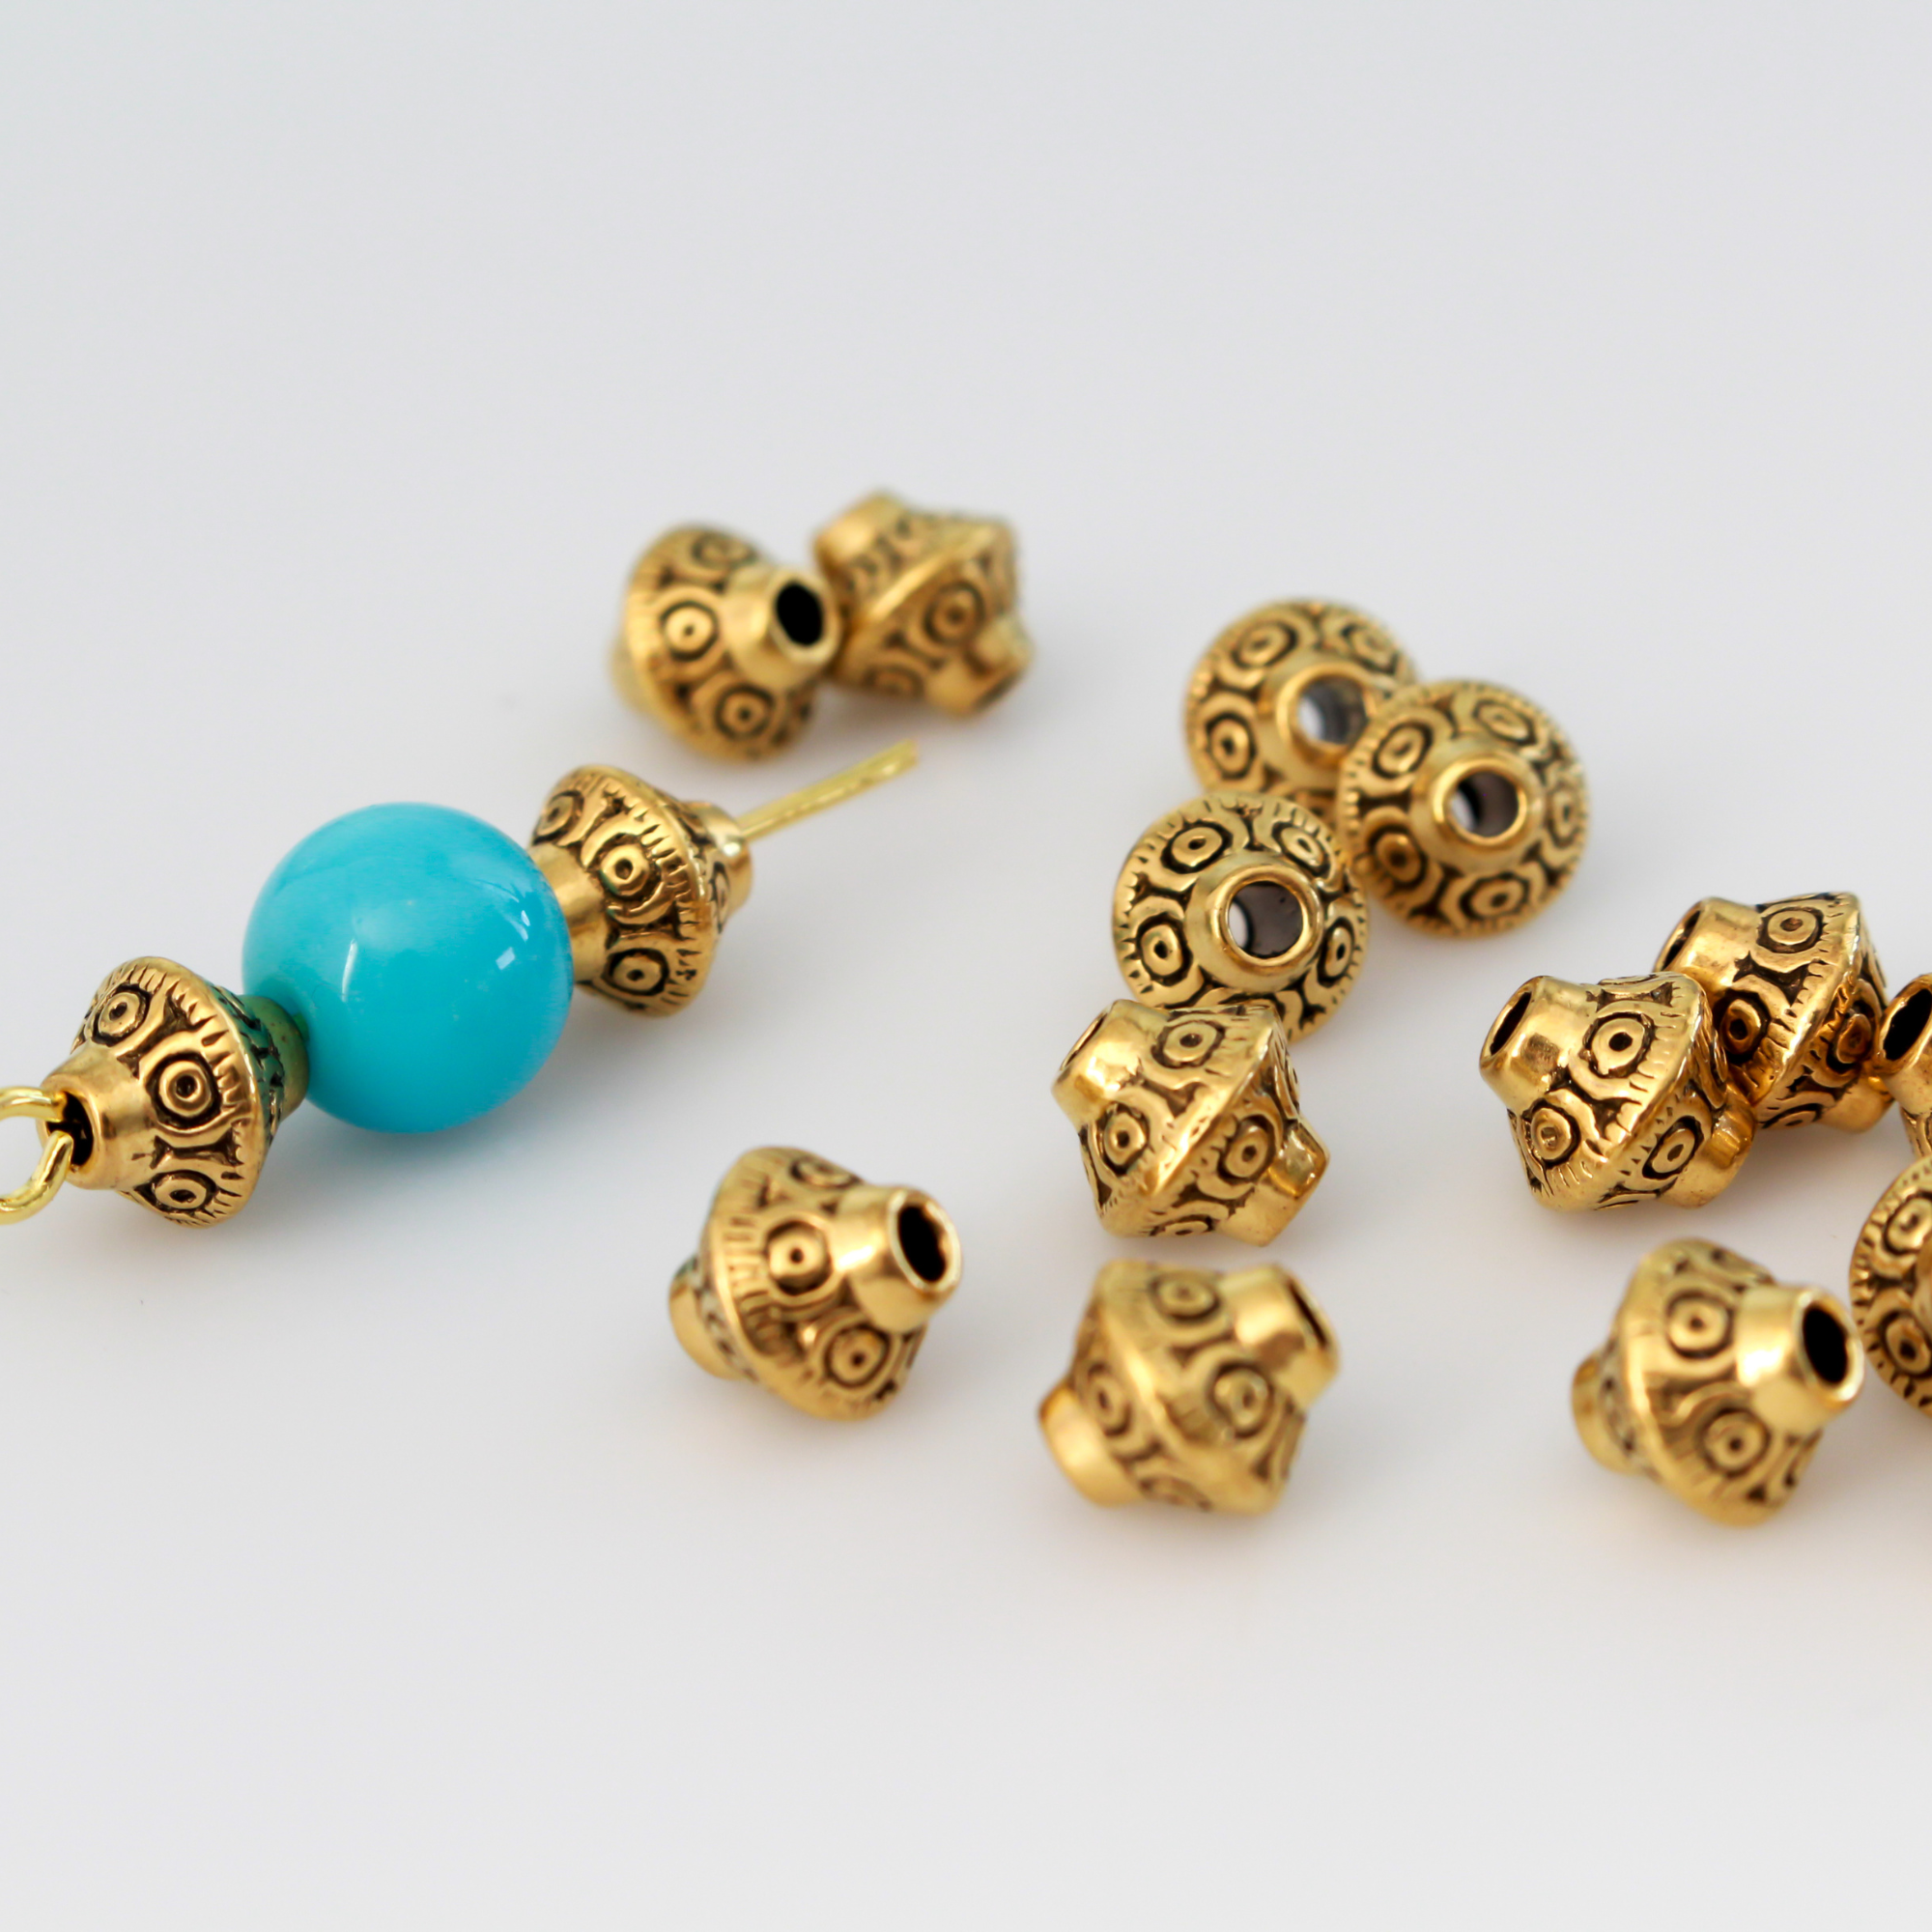 50 metal bicone shaped spacer beads with an antiqued golden finish and a carved dot design